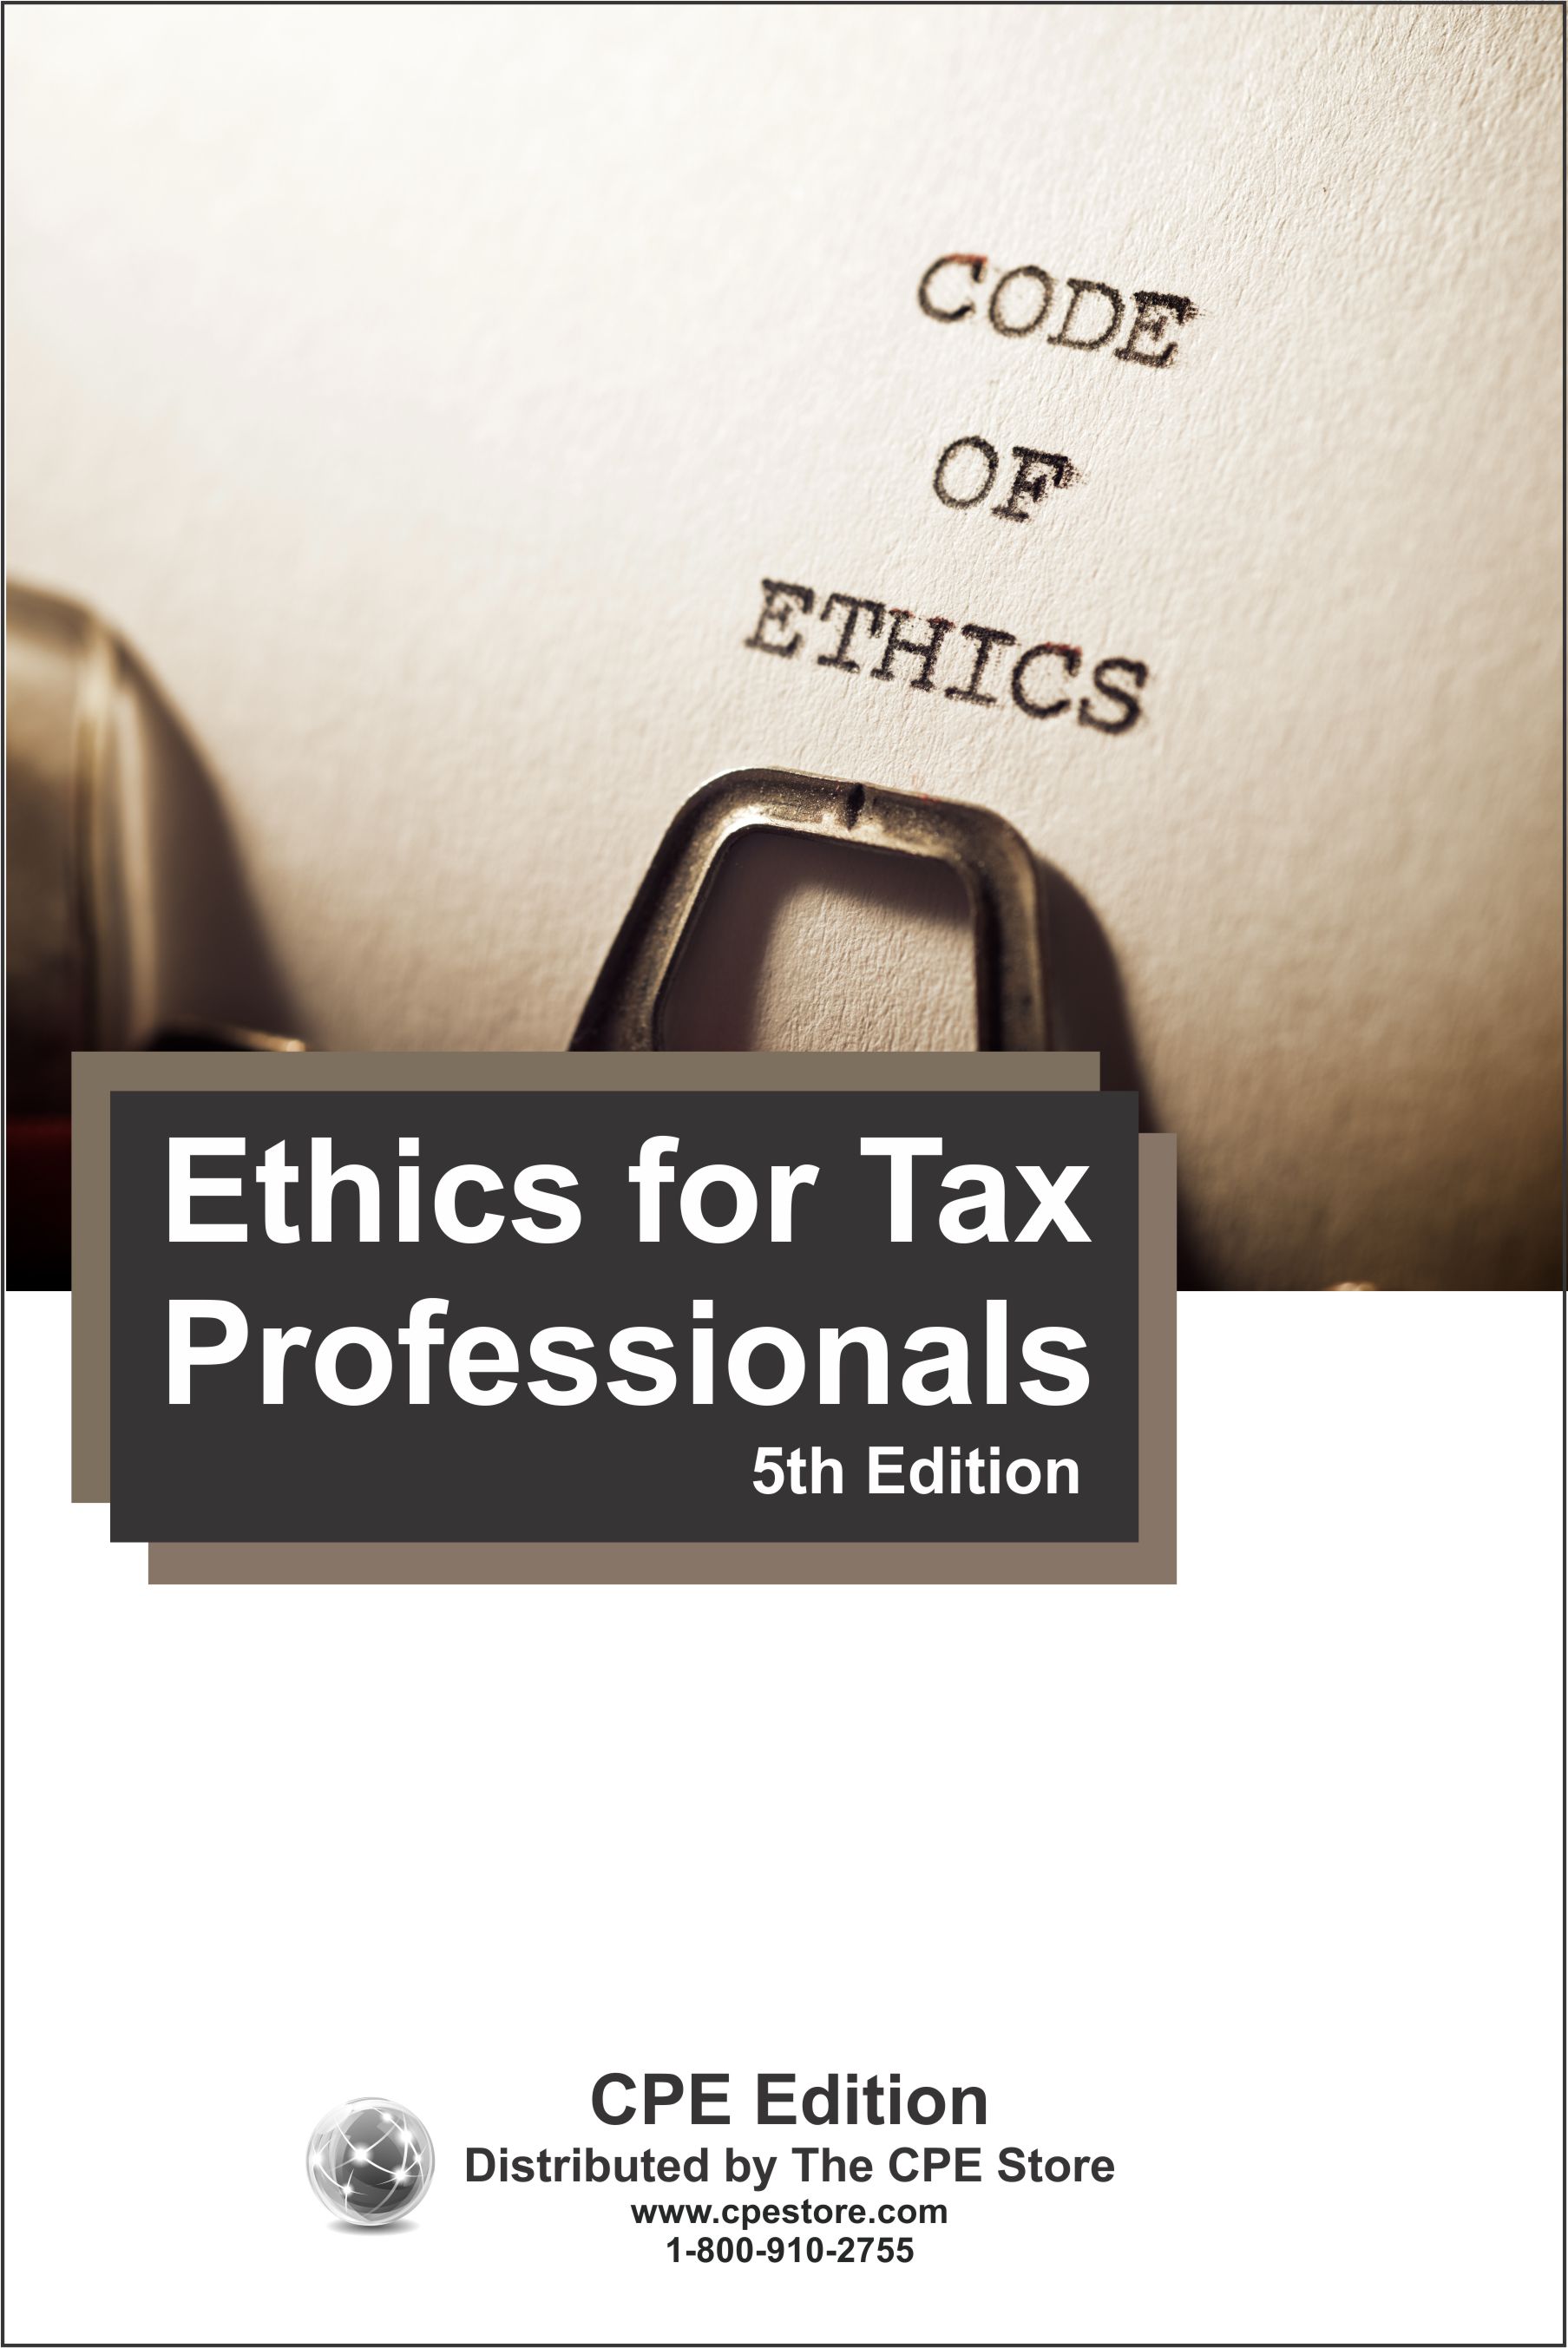 Ethics for Tax Professionals